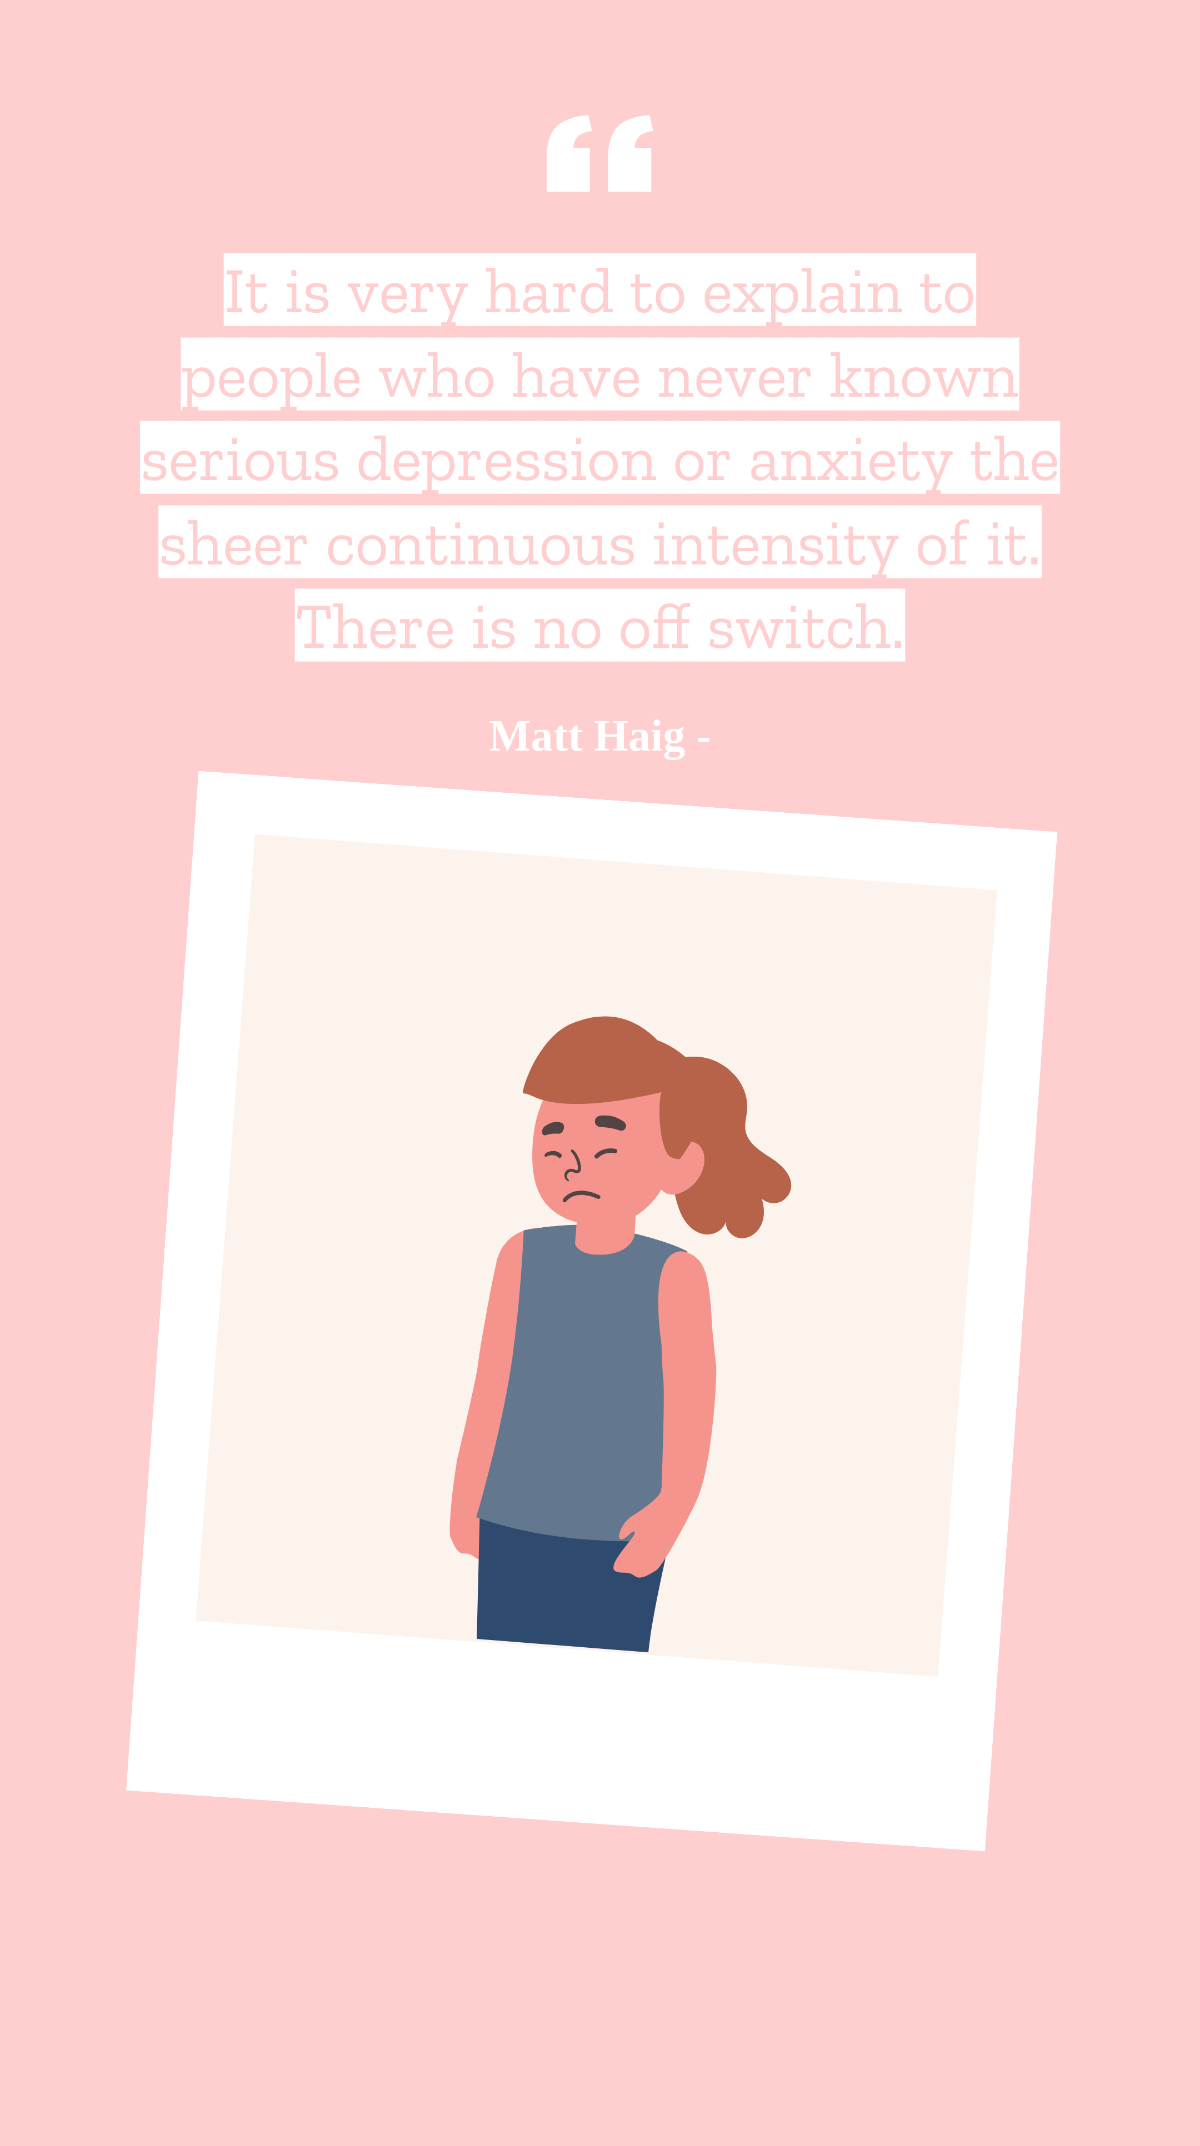 Matt Haig - It is very hard to explain to people who have never known serious depression or anxiety the sheer continuous intensity of it. There is no off switch. Template